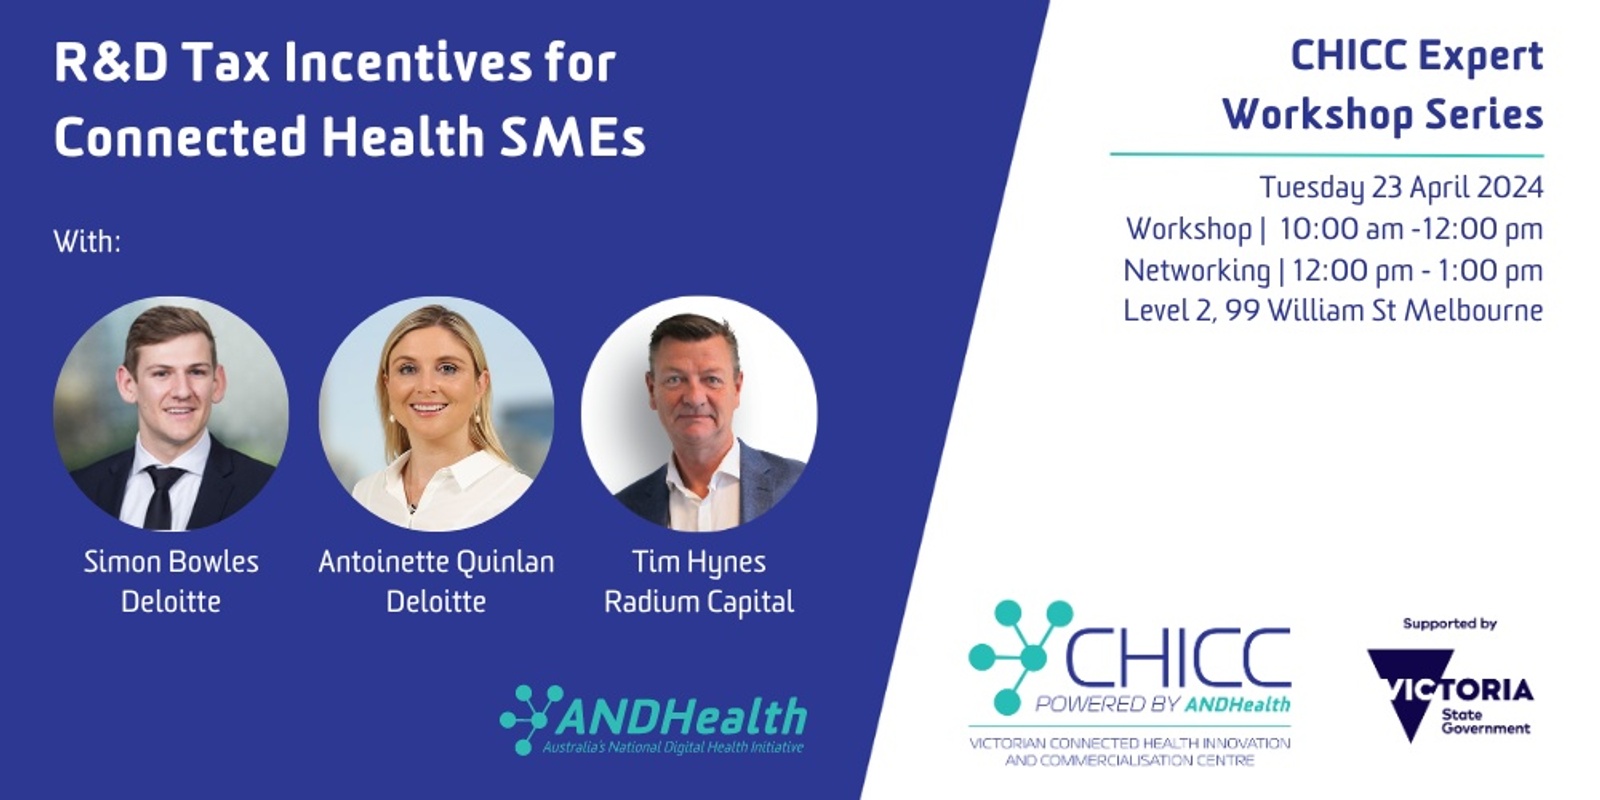 Banner image for CHICC Expert Workshop: R&D Tax Incentives for Connected Health SMEs